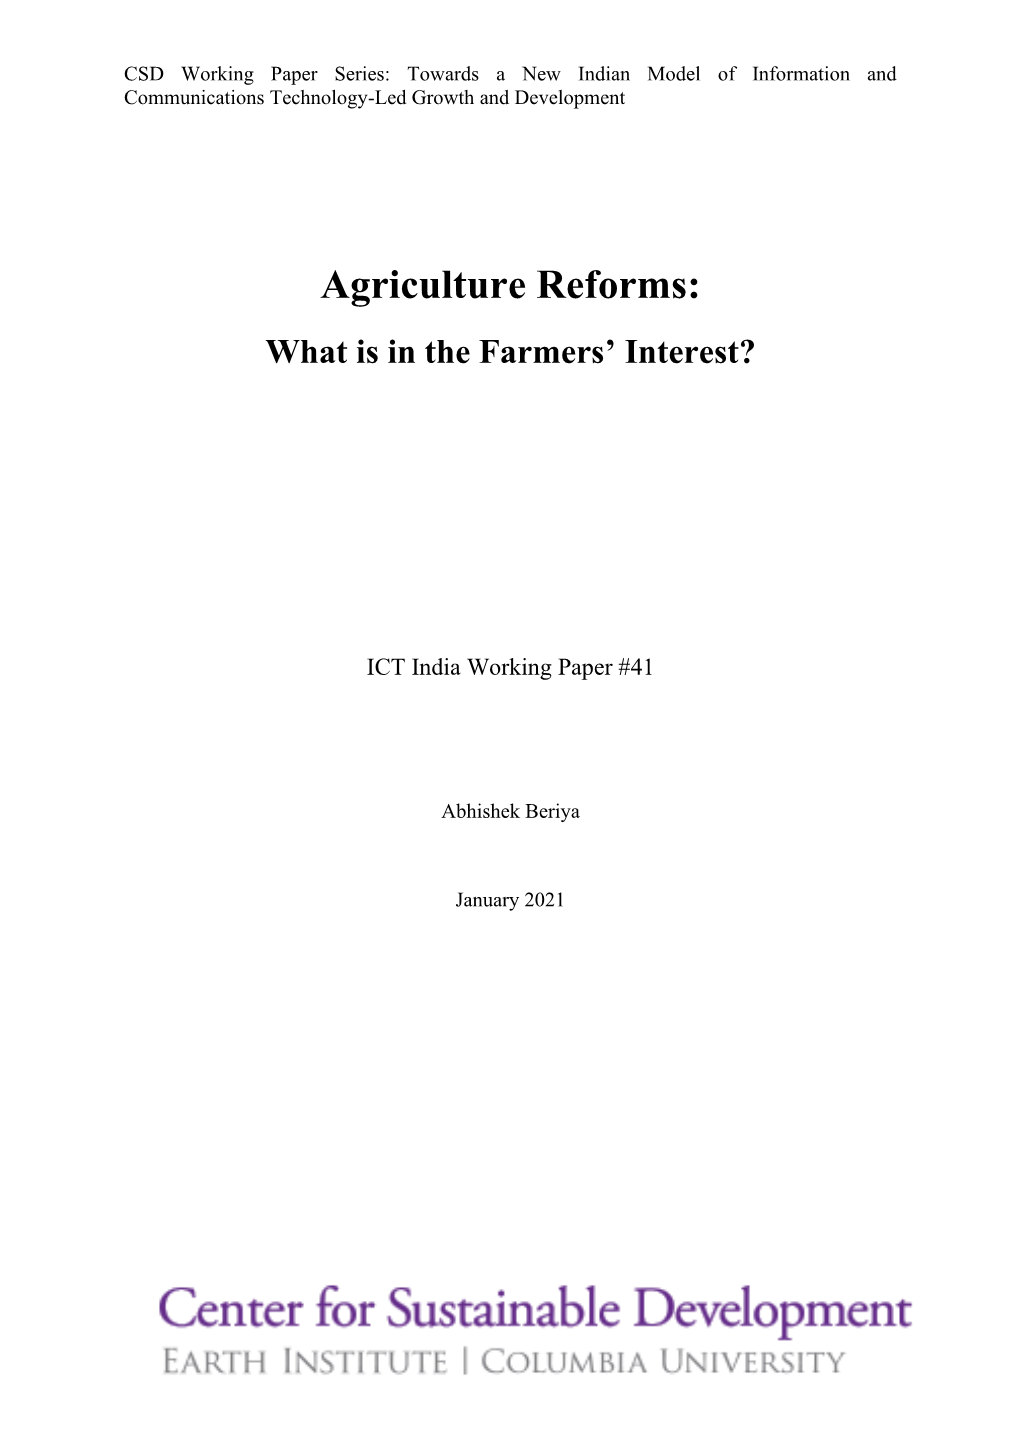 Agriculture Reforms: What Is in the Farmers' Interest?